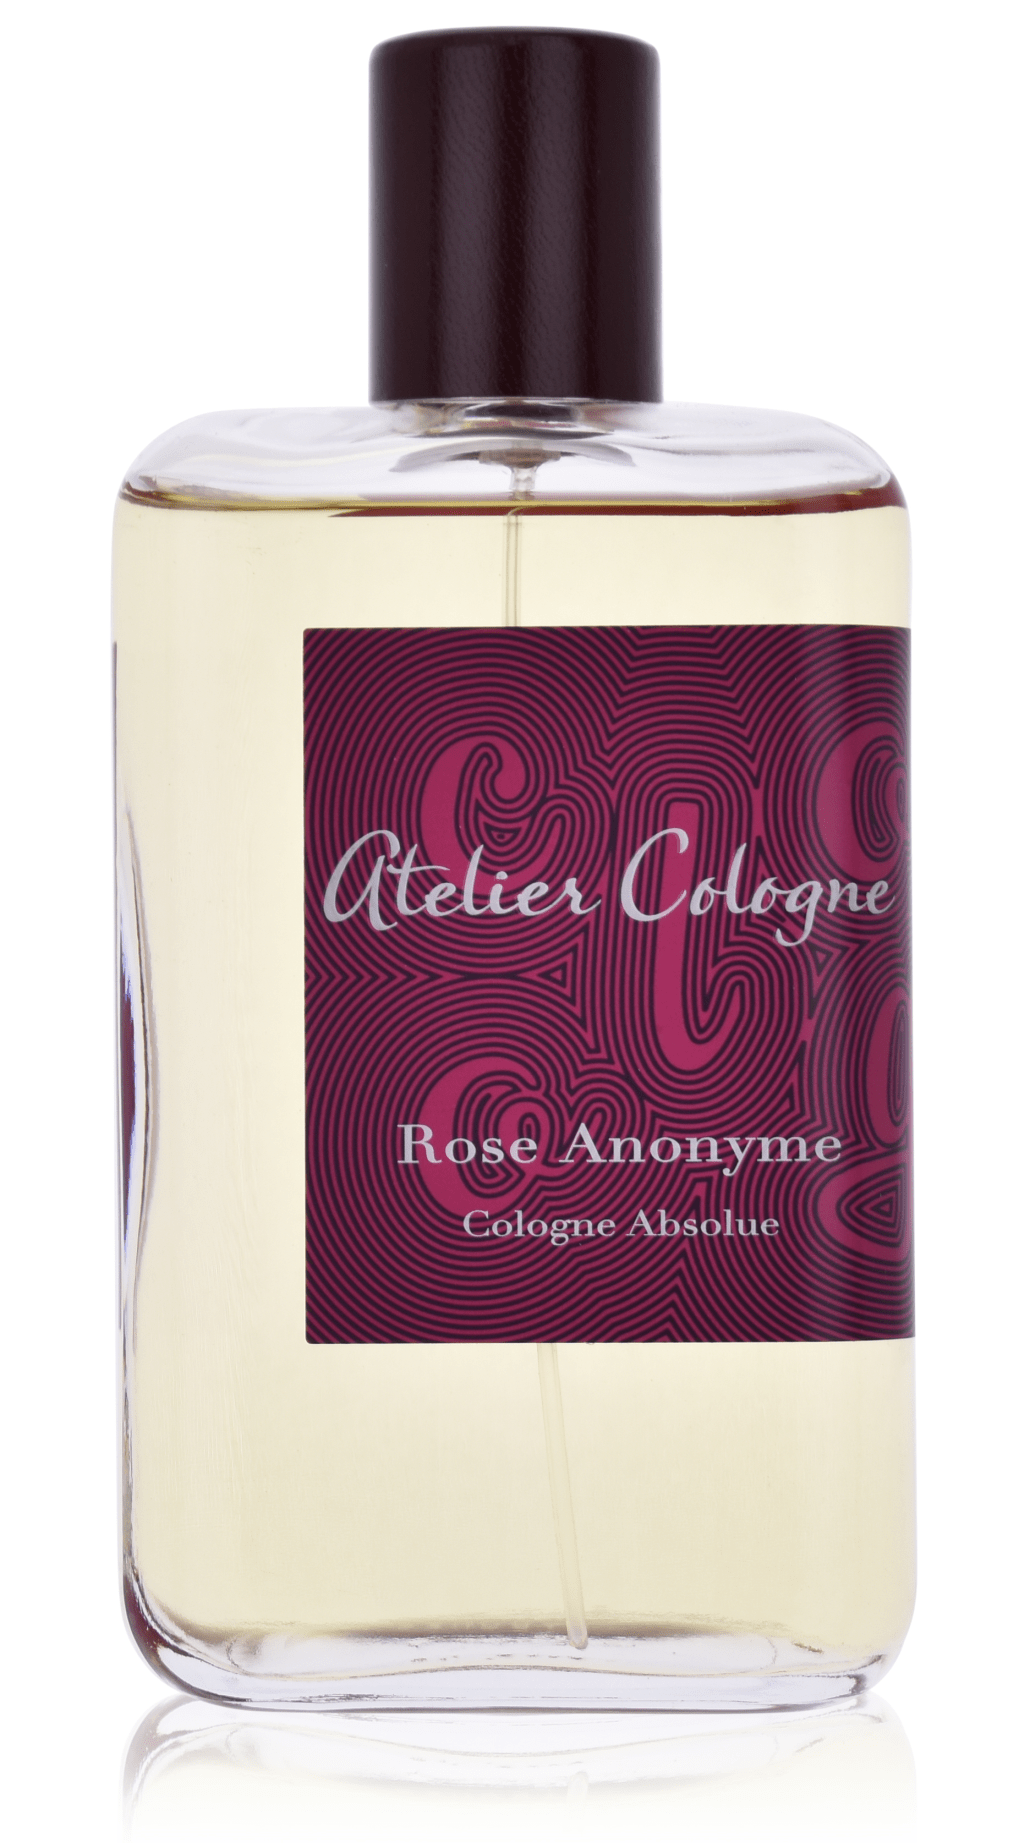 Atelier Cologne Rose Anonyme 200 ml Cologne Absolue  (Pure Perfume)     